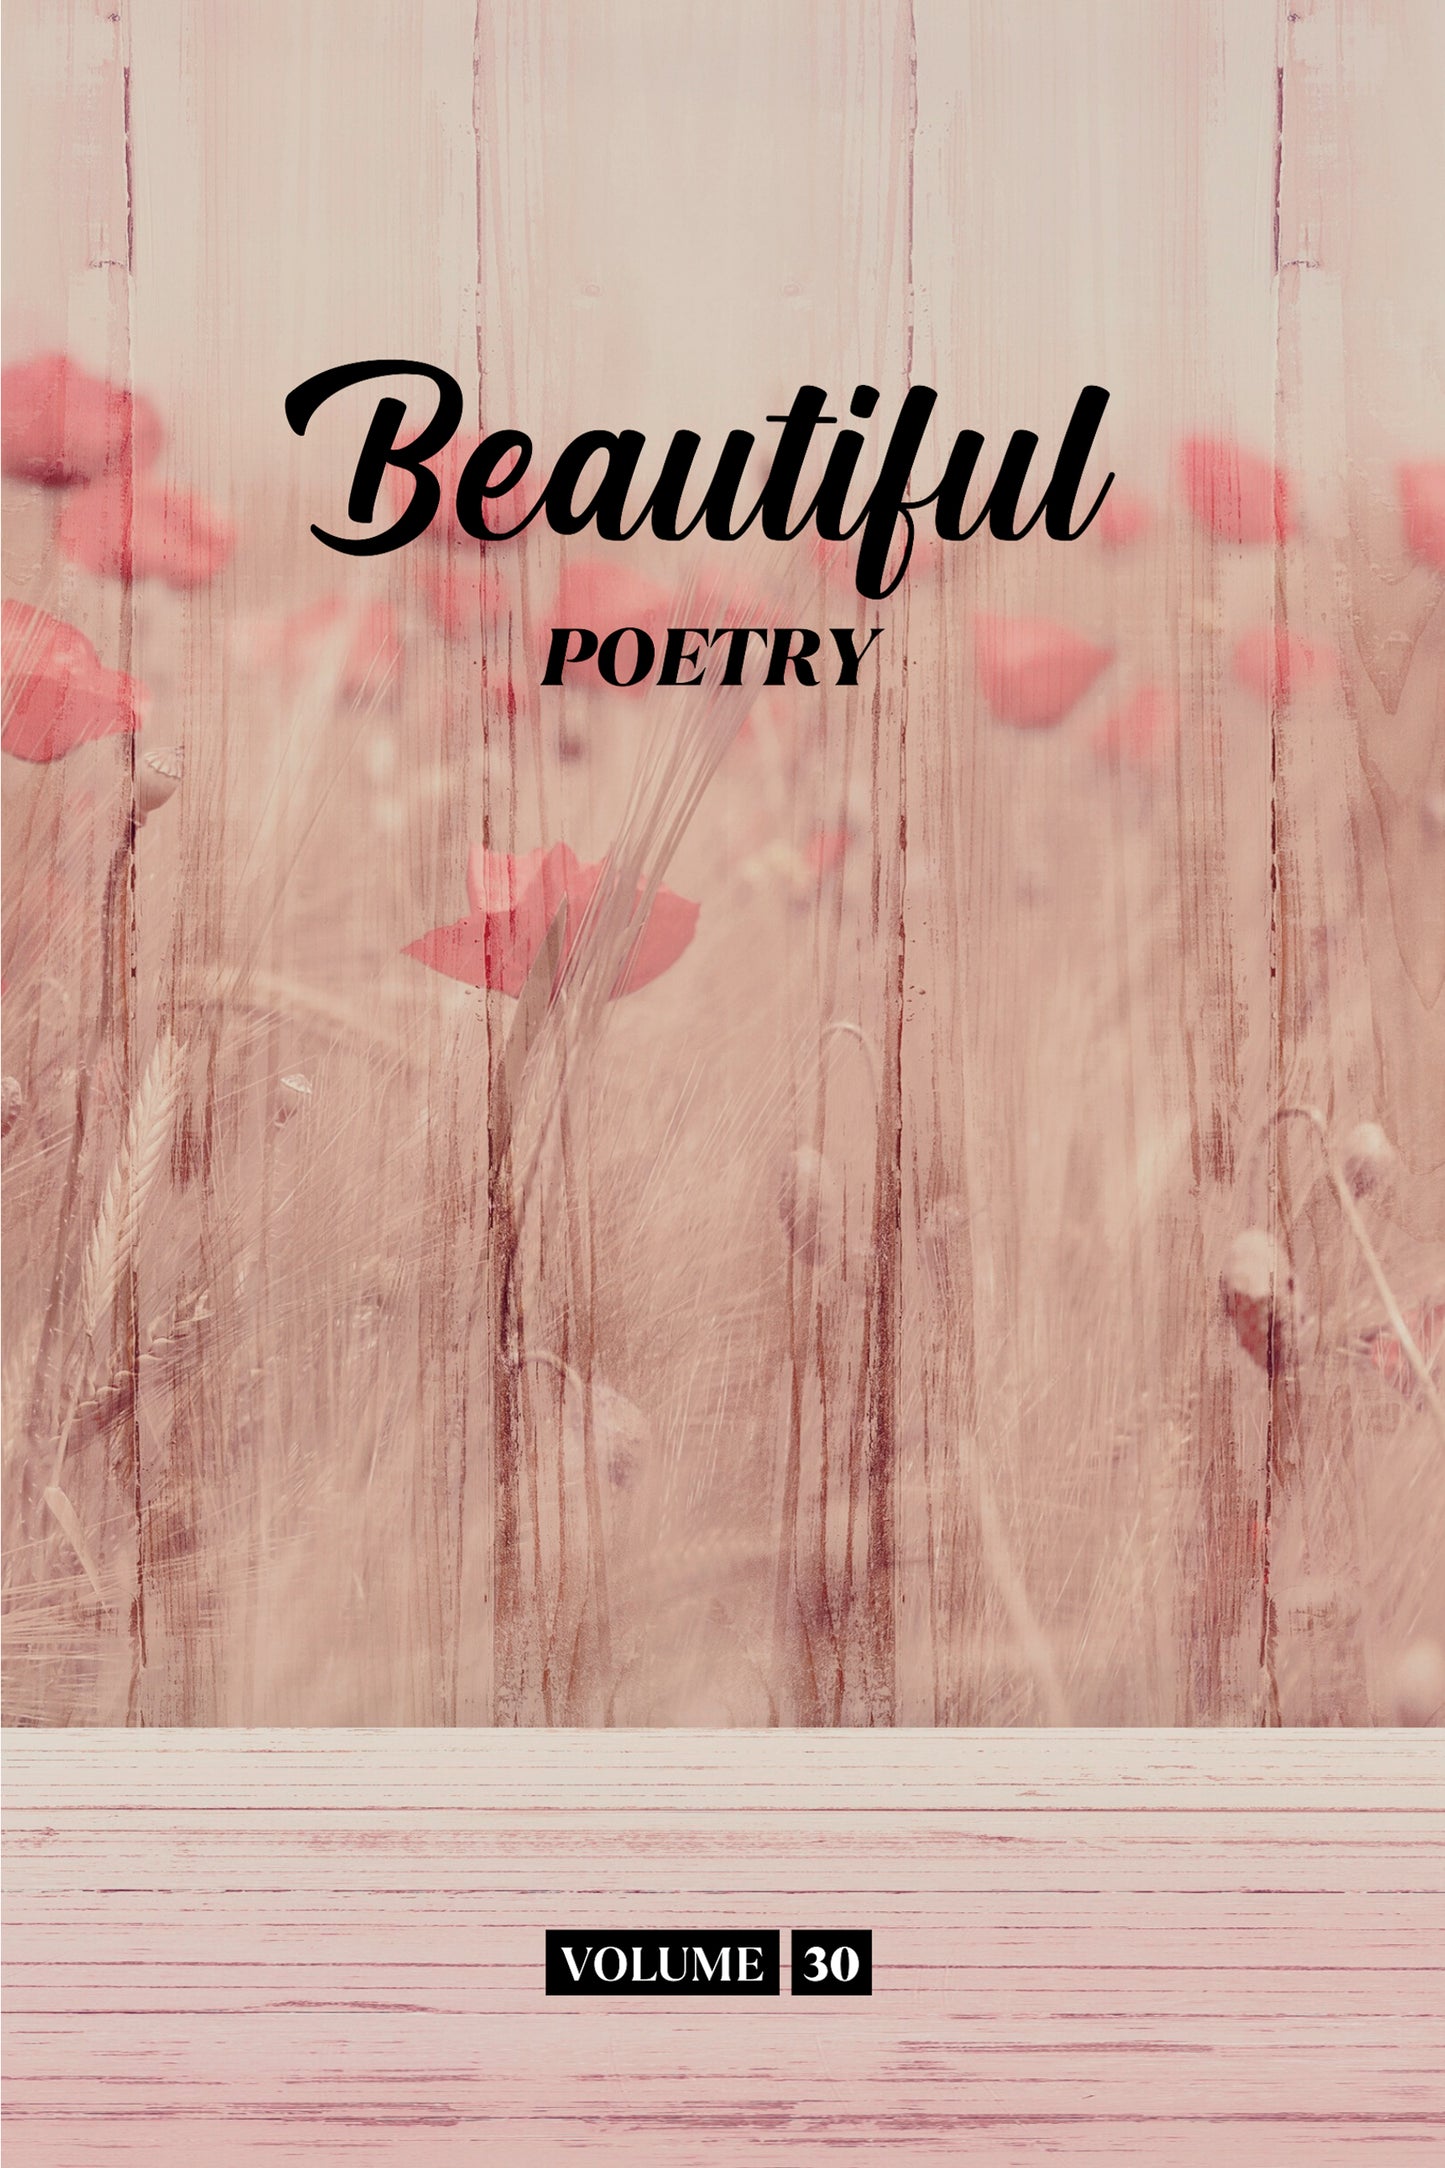 Beautiful Poetry (Volume 30) - Physical Book (Pre-Order)